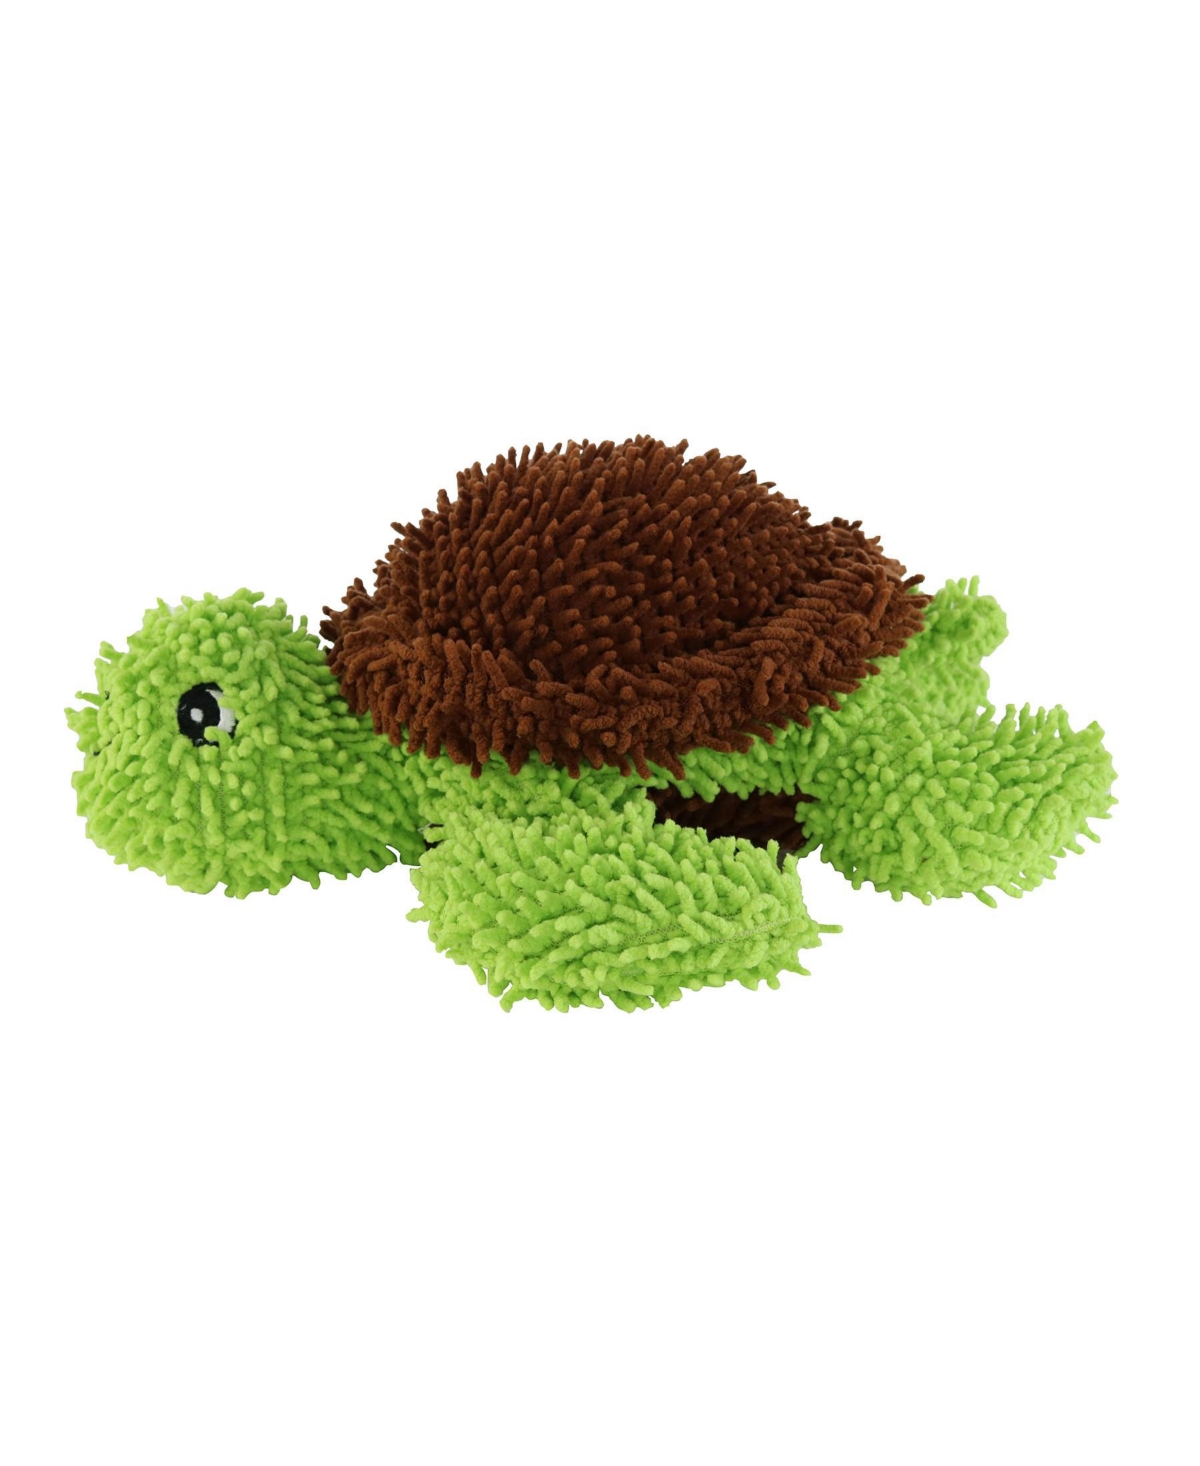 Microfiber Ball Med Turtle Squeaker Dog Toy - Green